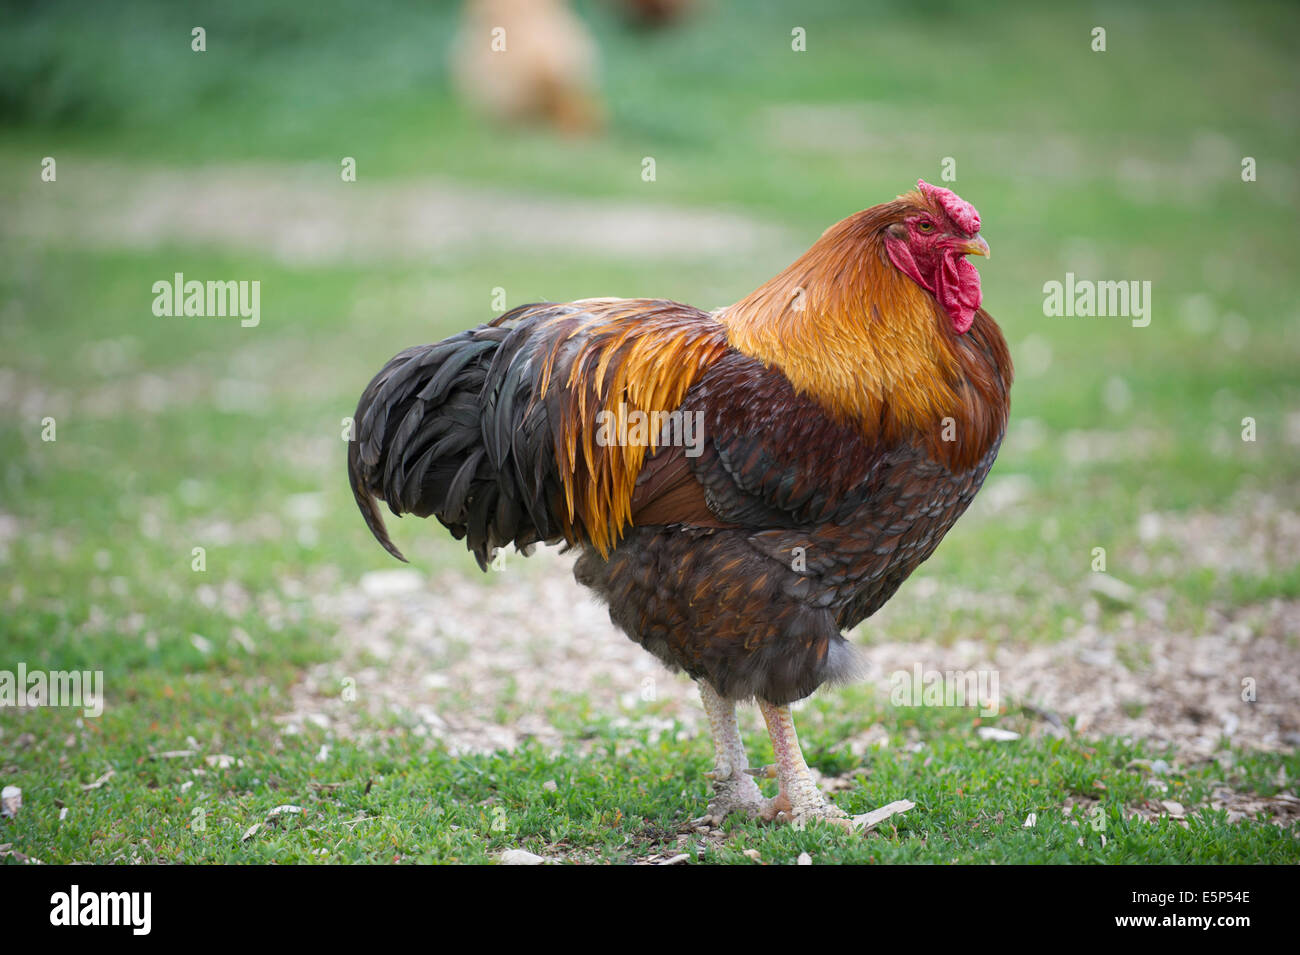 Gold Lace Wyandotte Cross rooster Stock Photo - Alamy